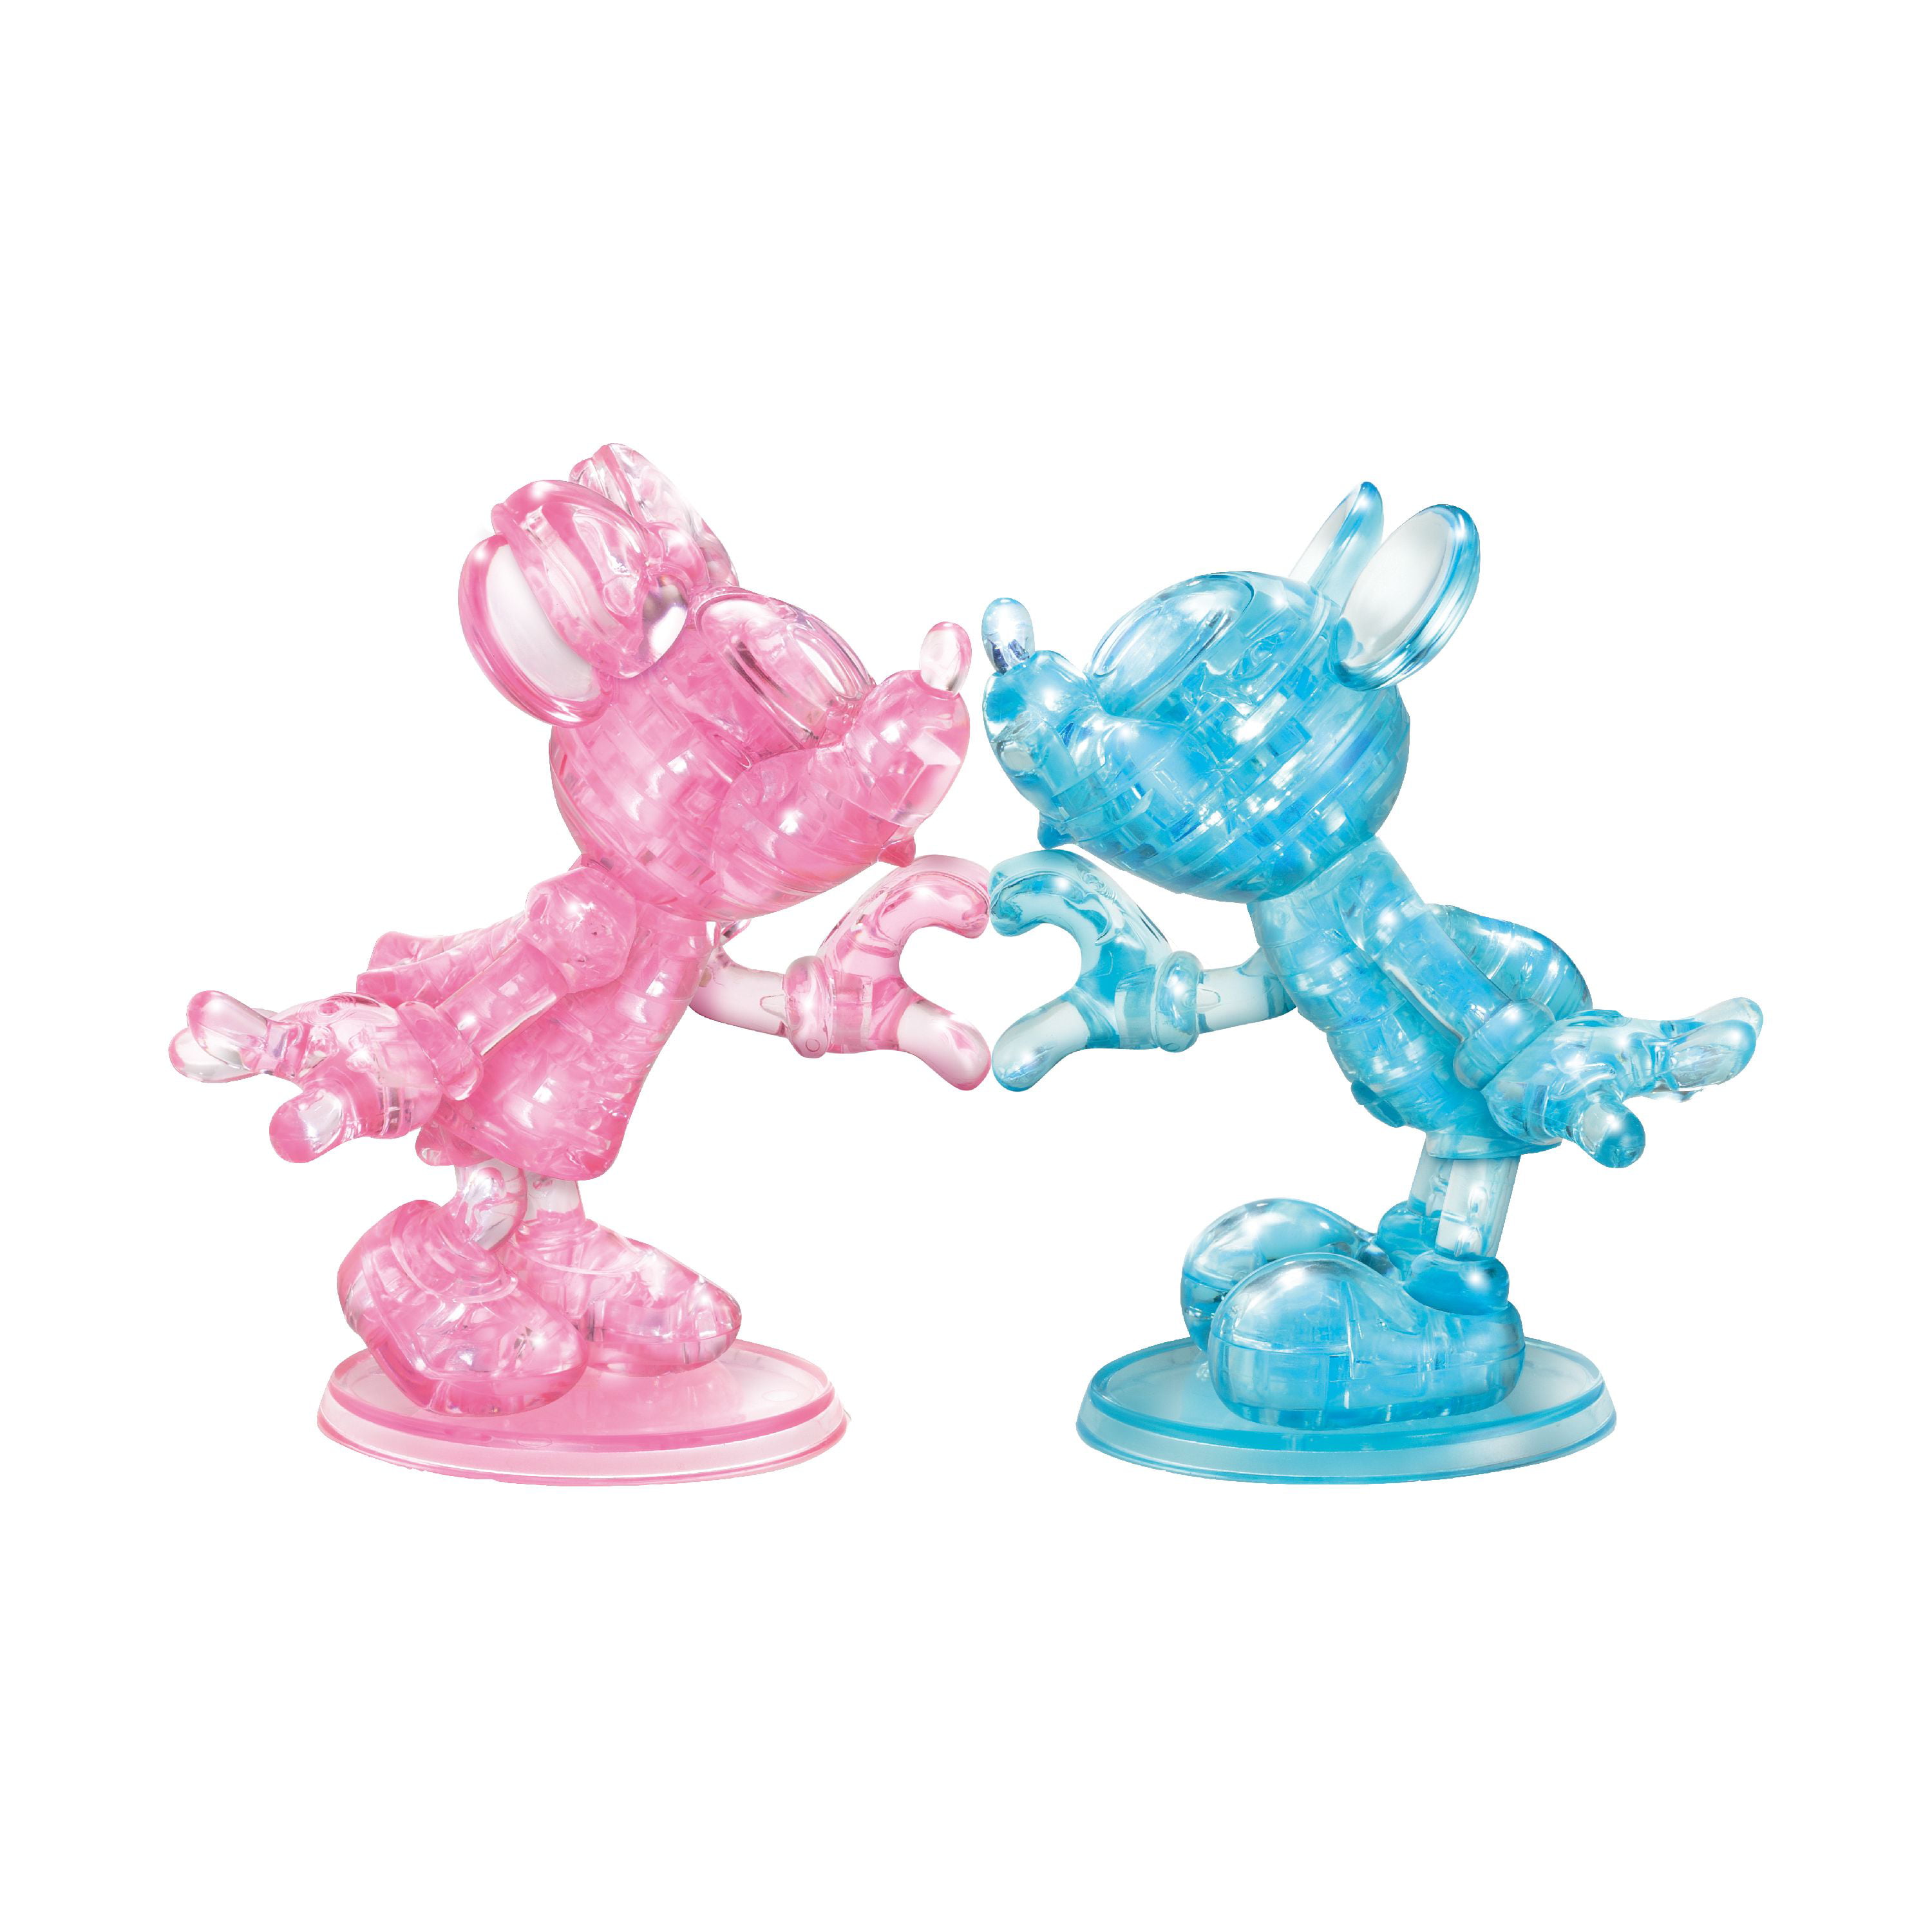 Mickey and Minnie Mouse Bundle of Two Bepuzzled 3D Crystal Puzzles